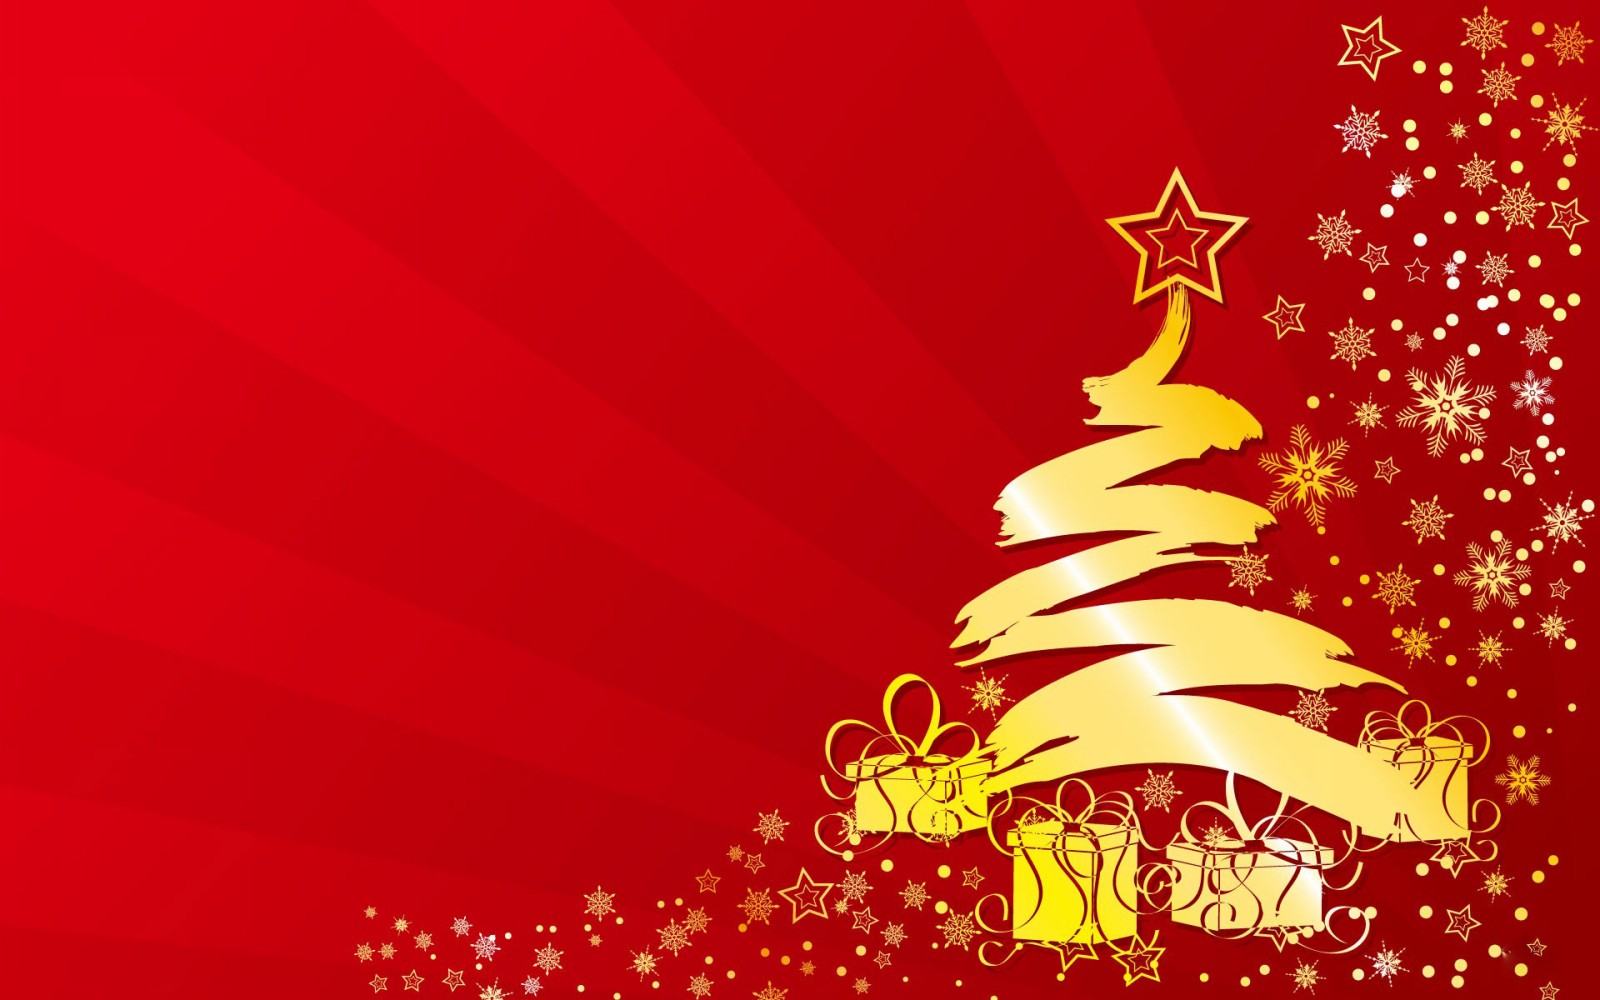 Christmas Tree Clip Art HD Wallpapers - Christmas | ZoneHDwallpapers.